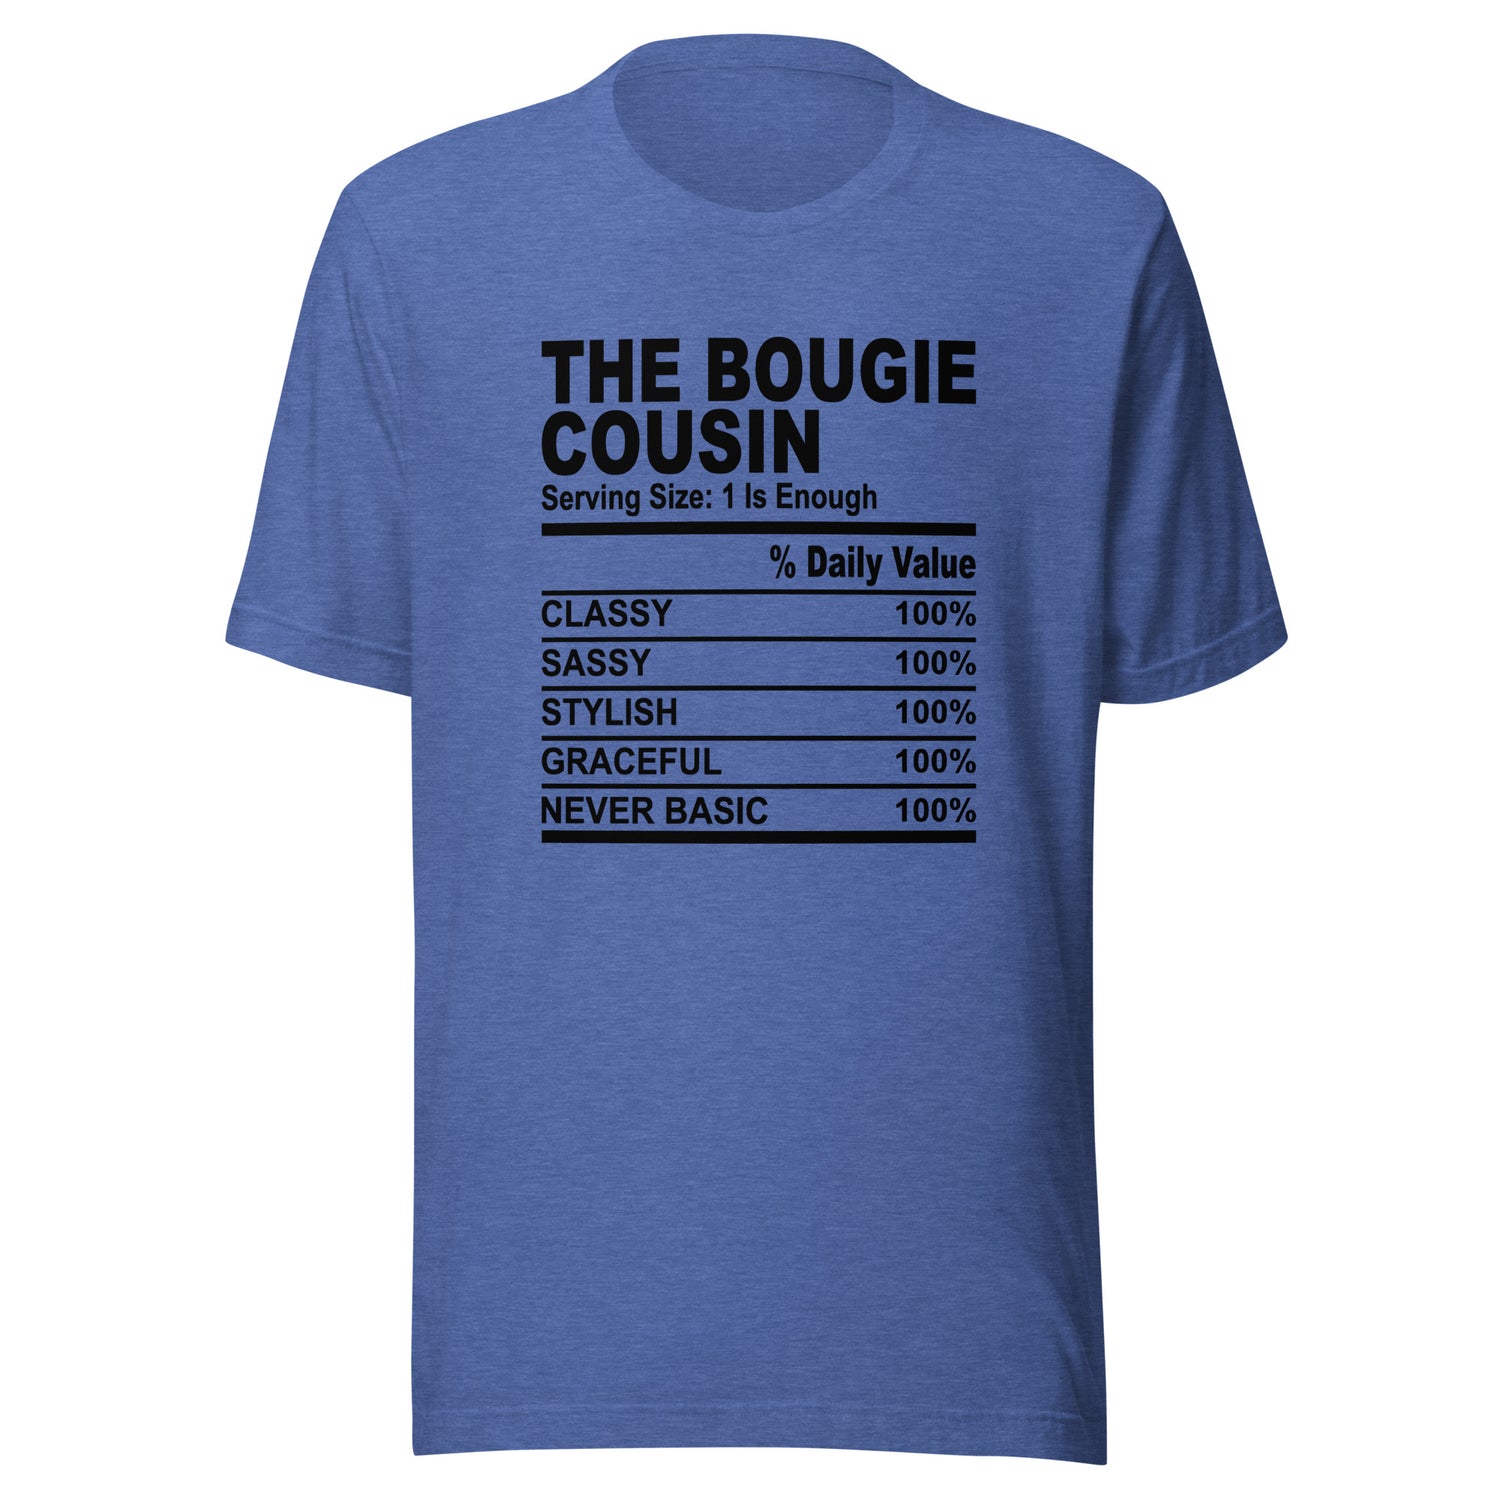 Bougie Cousin Tees